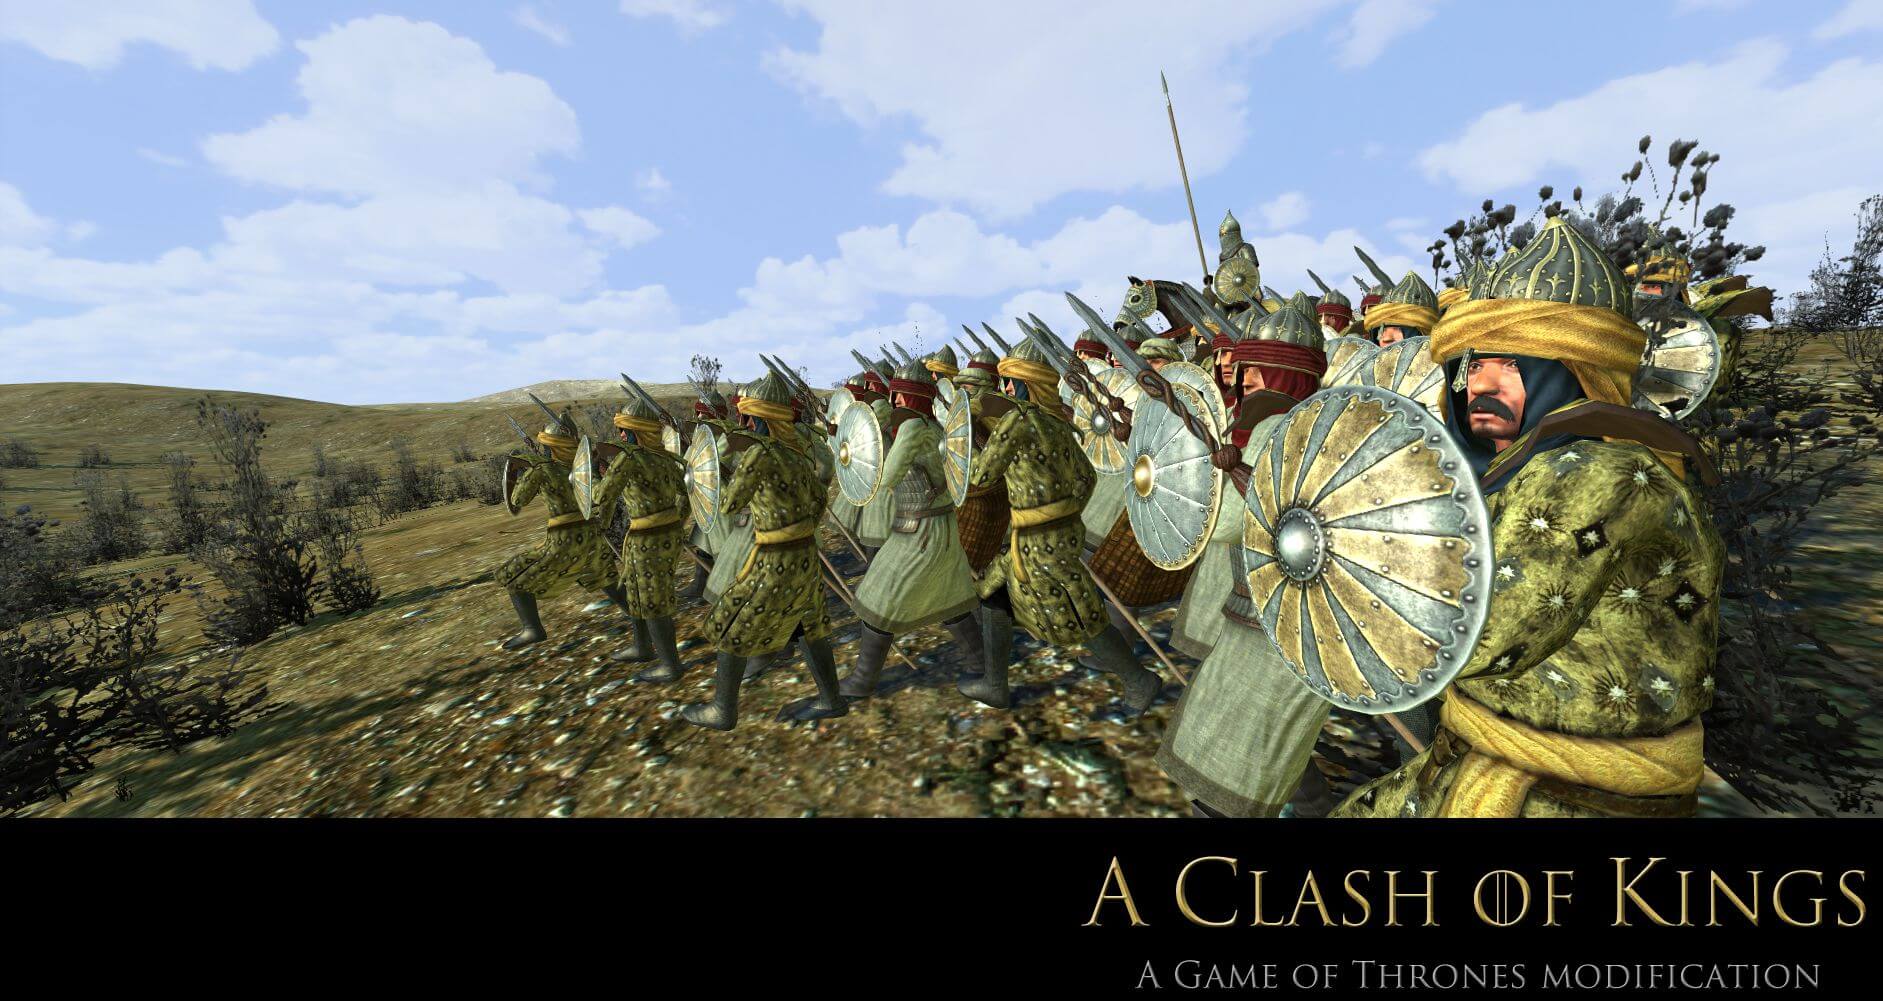 Warband король. Маунт блейд a Clash of Kings. Mount and Blade Clash of Kings. Mountain Blade a Clash of Kings. Mount & Blade: Warband — a Clash of Kings 7.1.